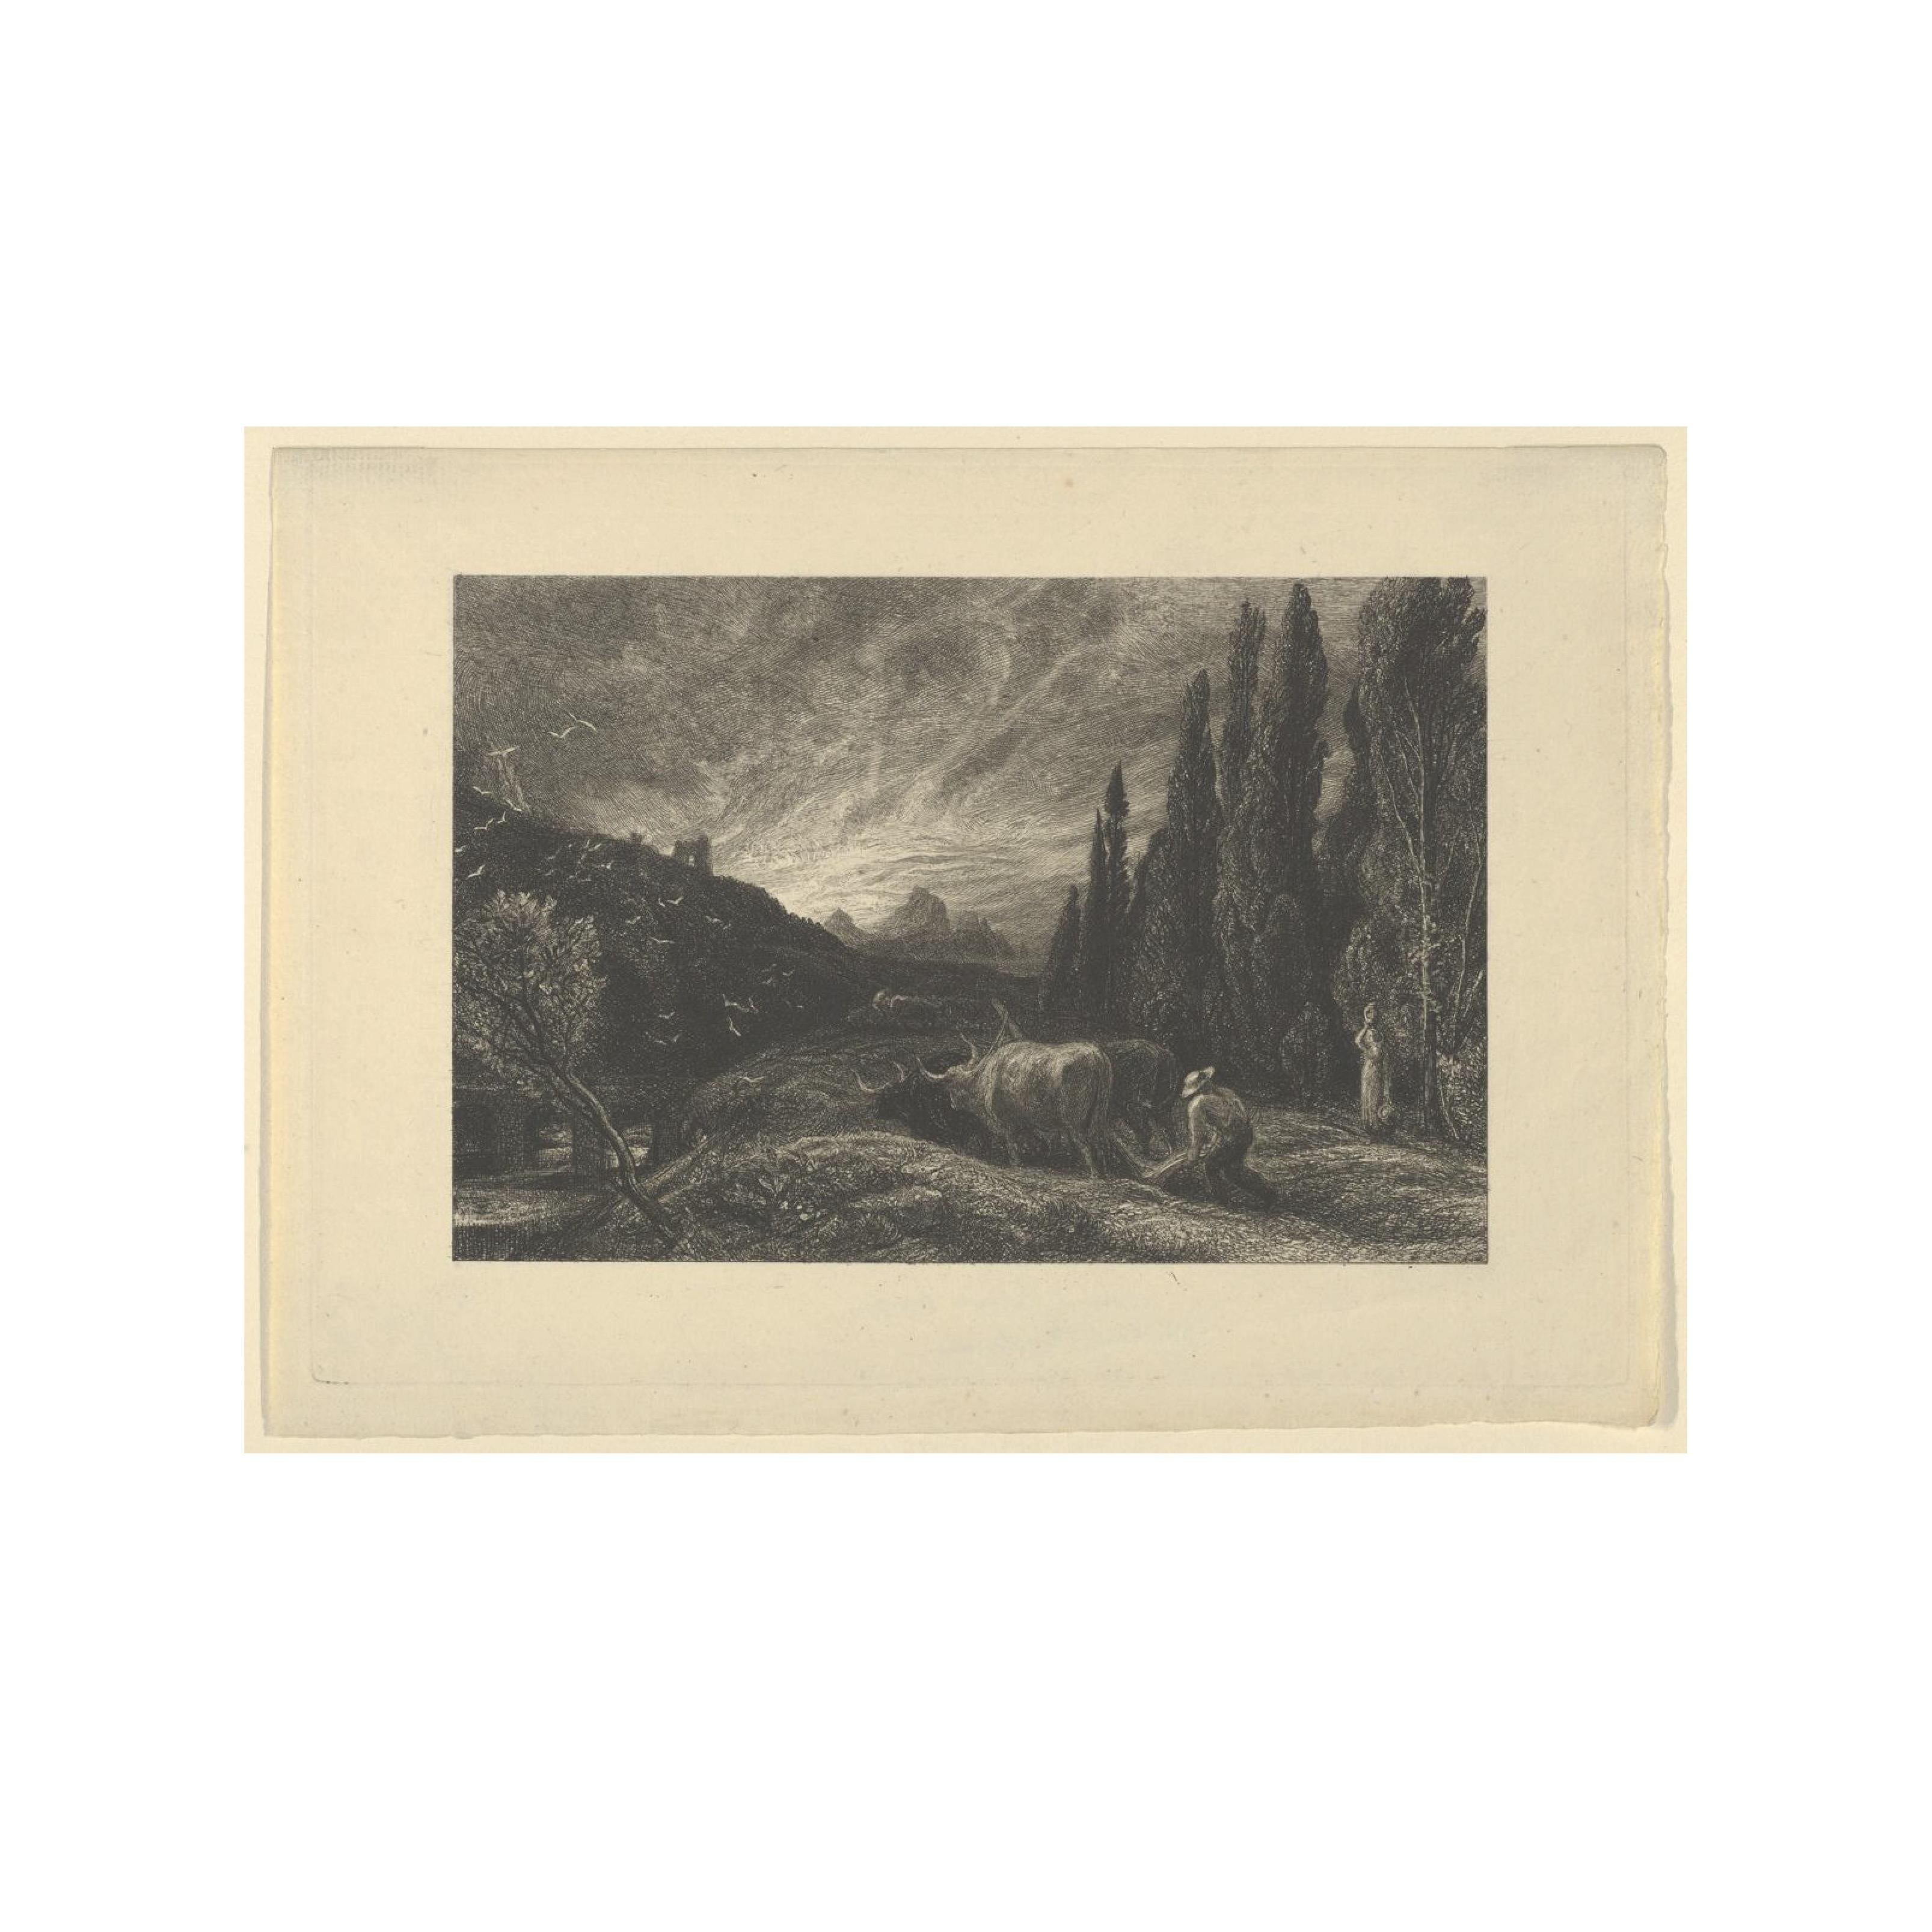 Samuel Palmer (b.1805) Landscape Print - 'The Early Ploughman' or 'The Morning Spread upon the Mountains'